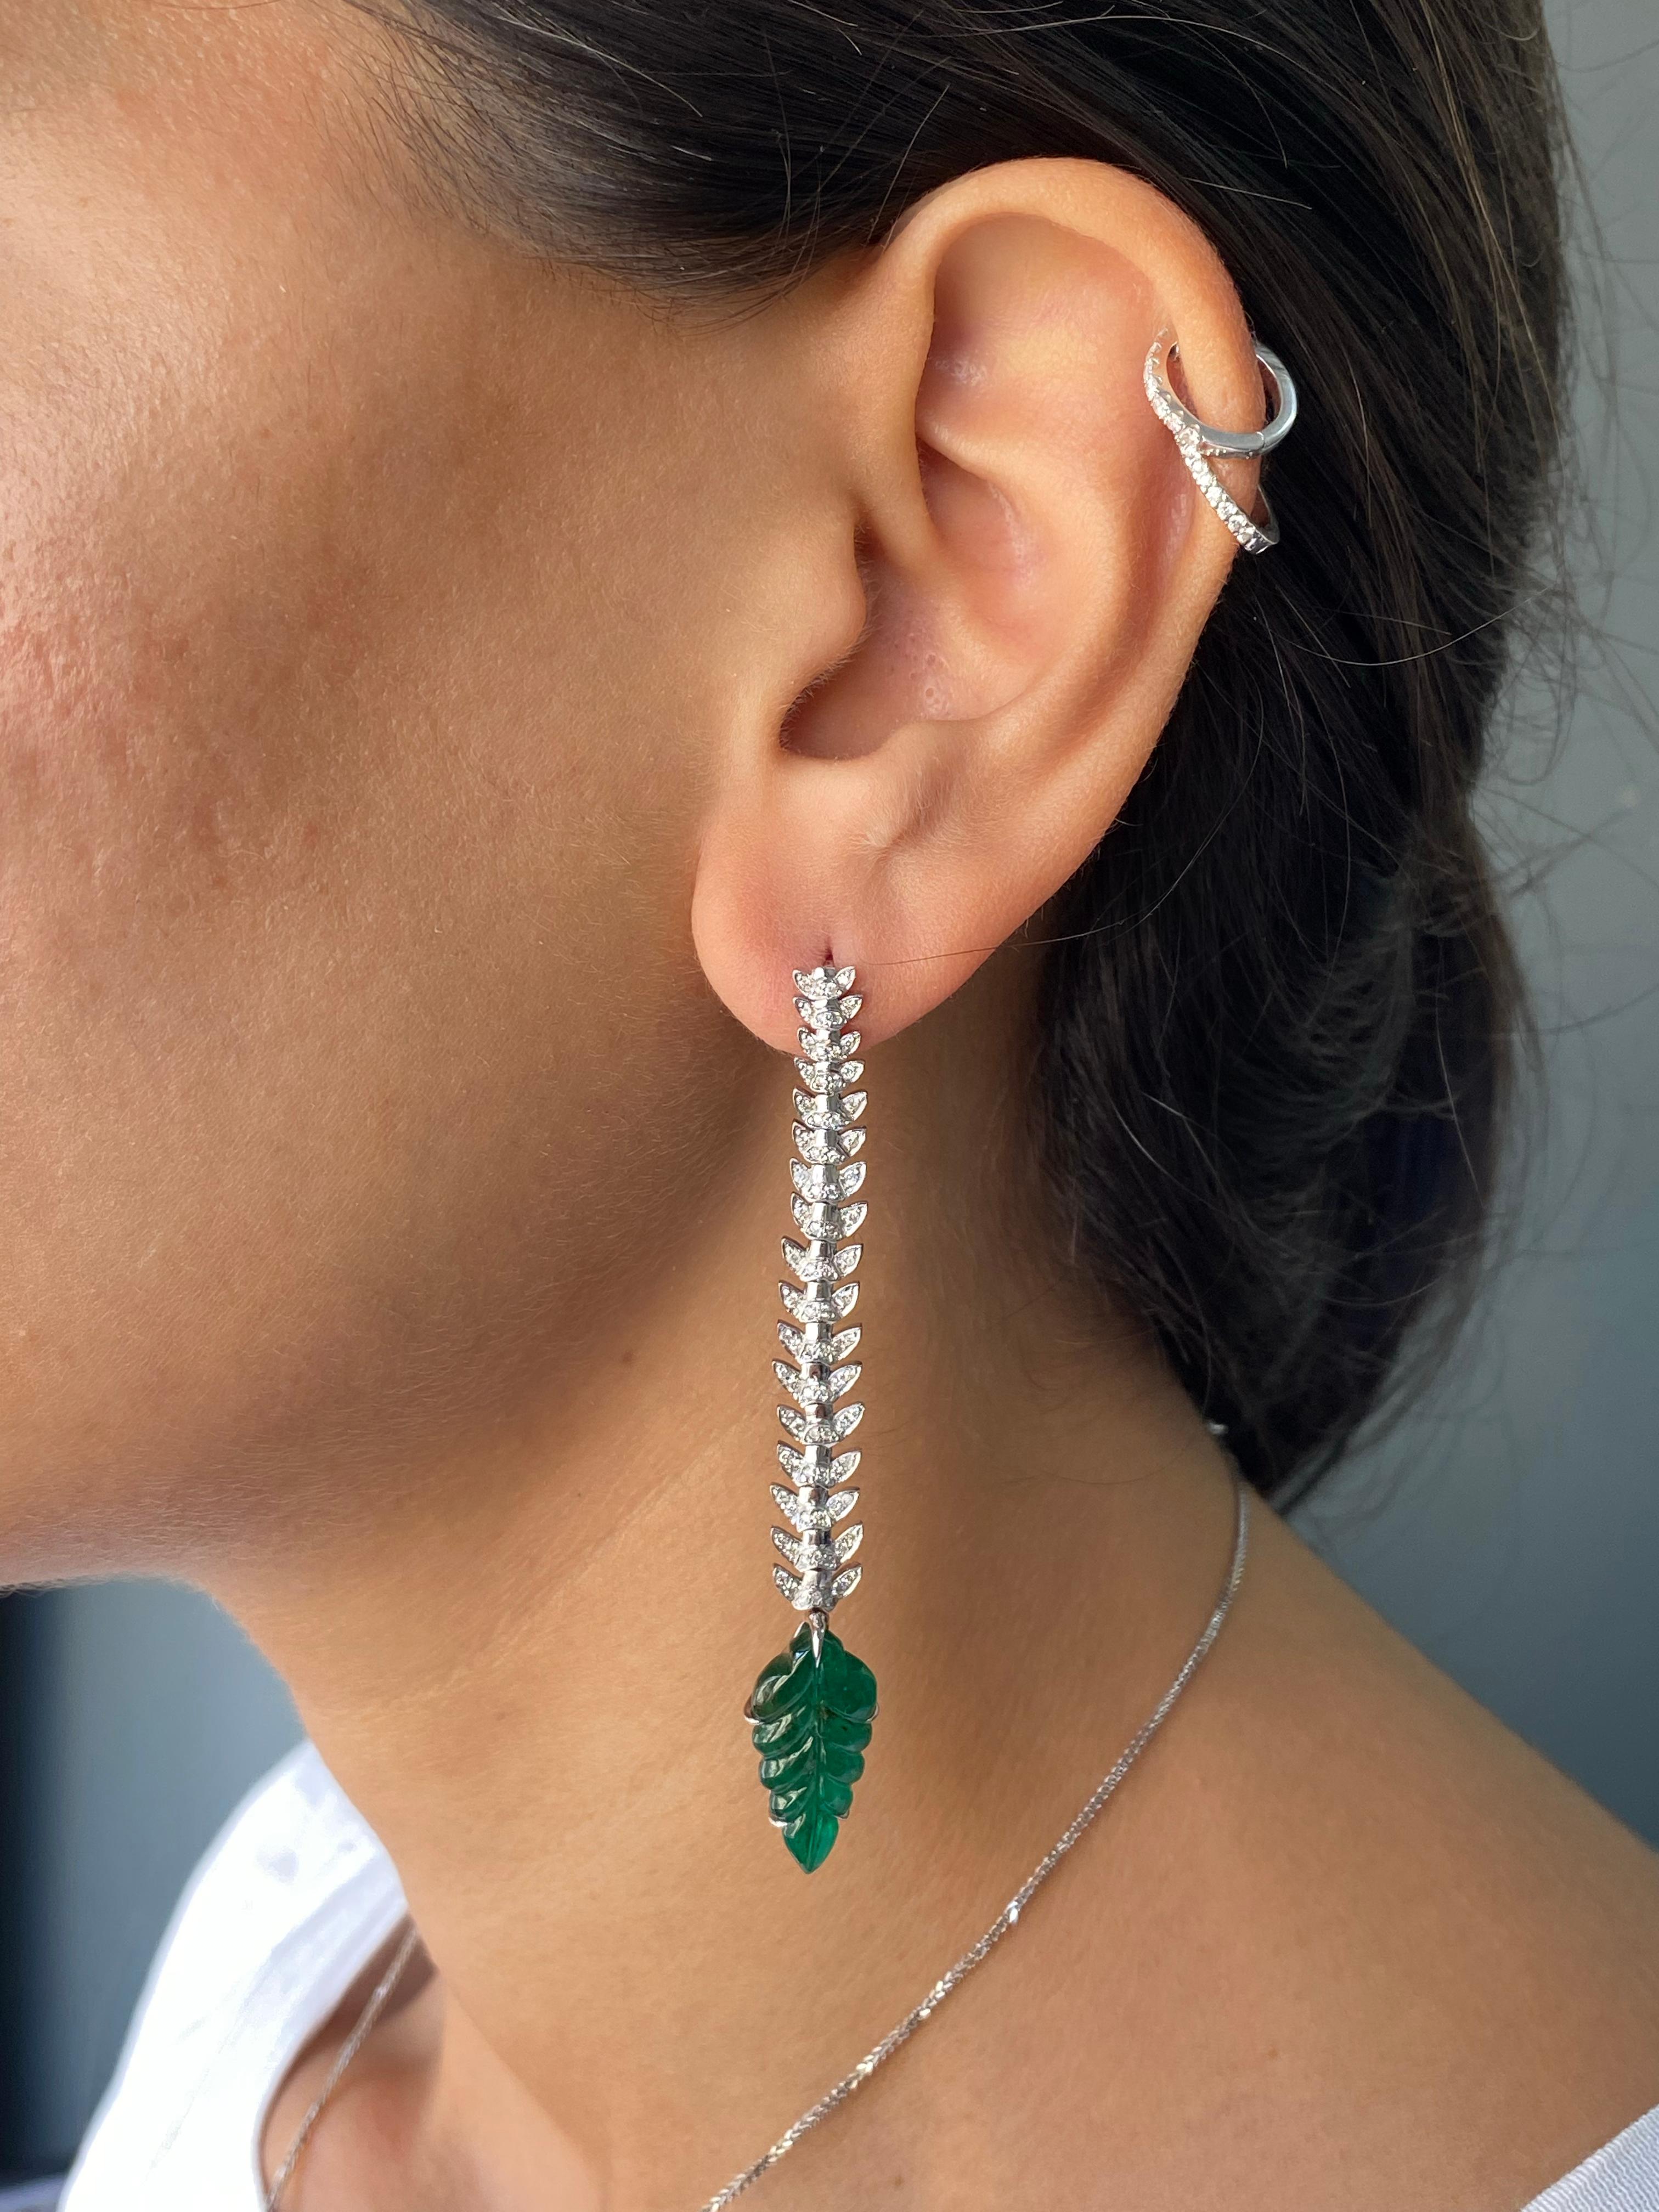 A stunning pair of art-deco 8 carat Zambian Emerald and Diamond dangle earrings, set in solid 18K White Gold. The earrings are very flexible and light weight, they are around 2.75 inches long, and come with a push-pull backing.
Please feel free to